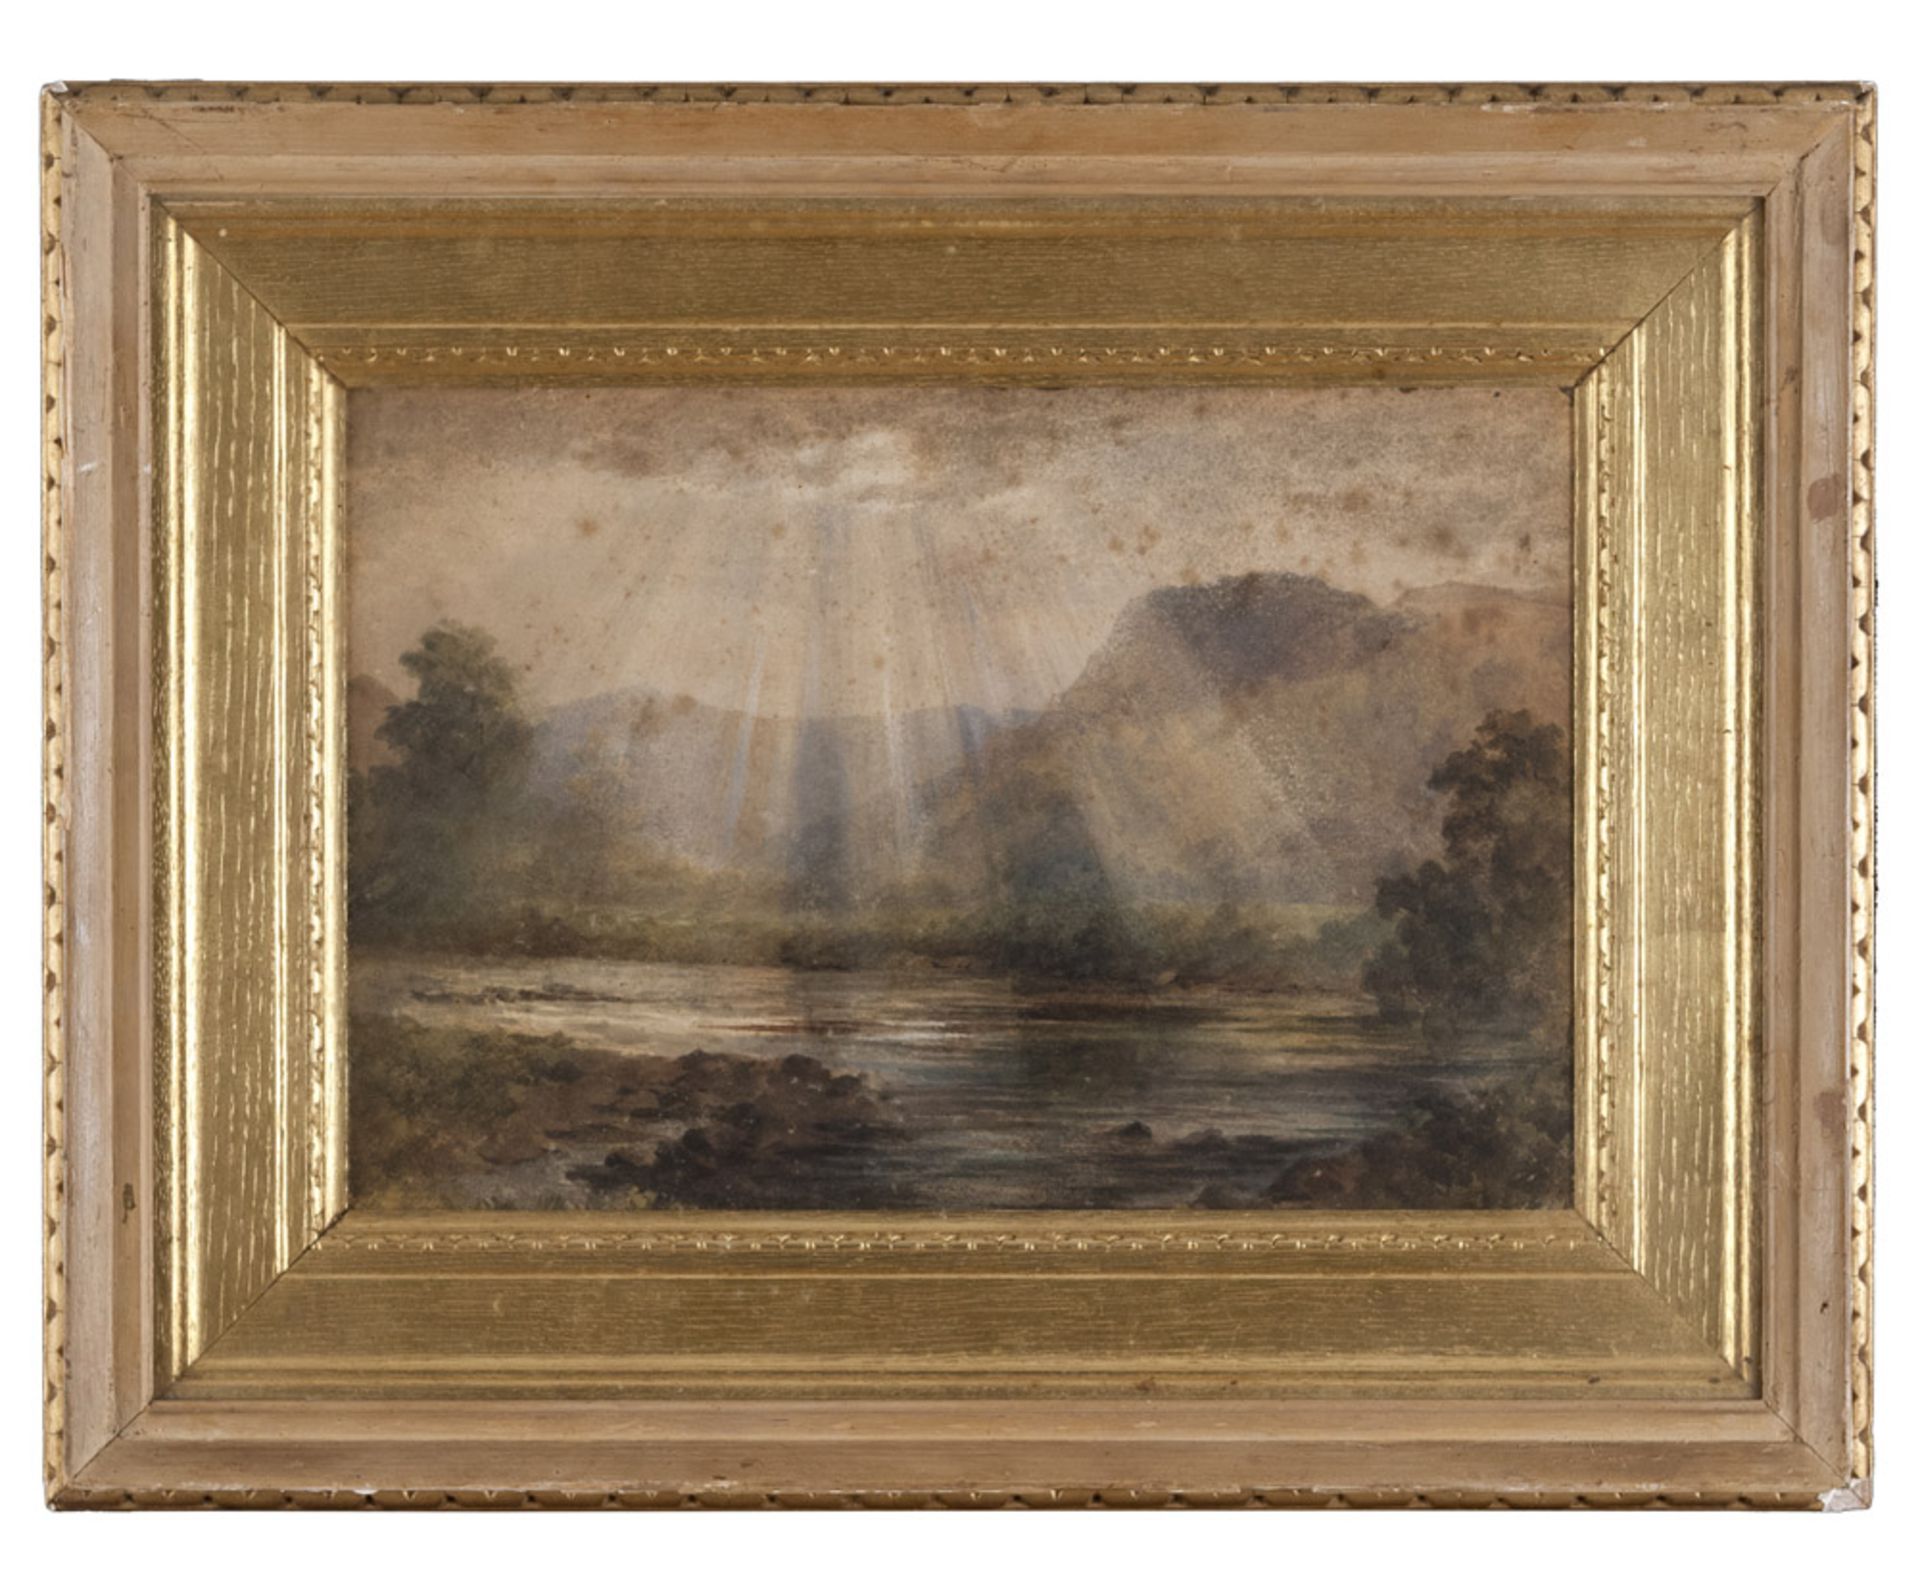 FRENCH PAINTER, MID 20TH CENTURY LAKE LANDSCAPE AT SUNRISE Watercolor on paper, cm. 26 x 37 Not